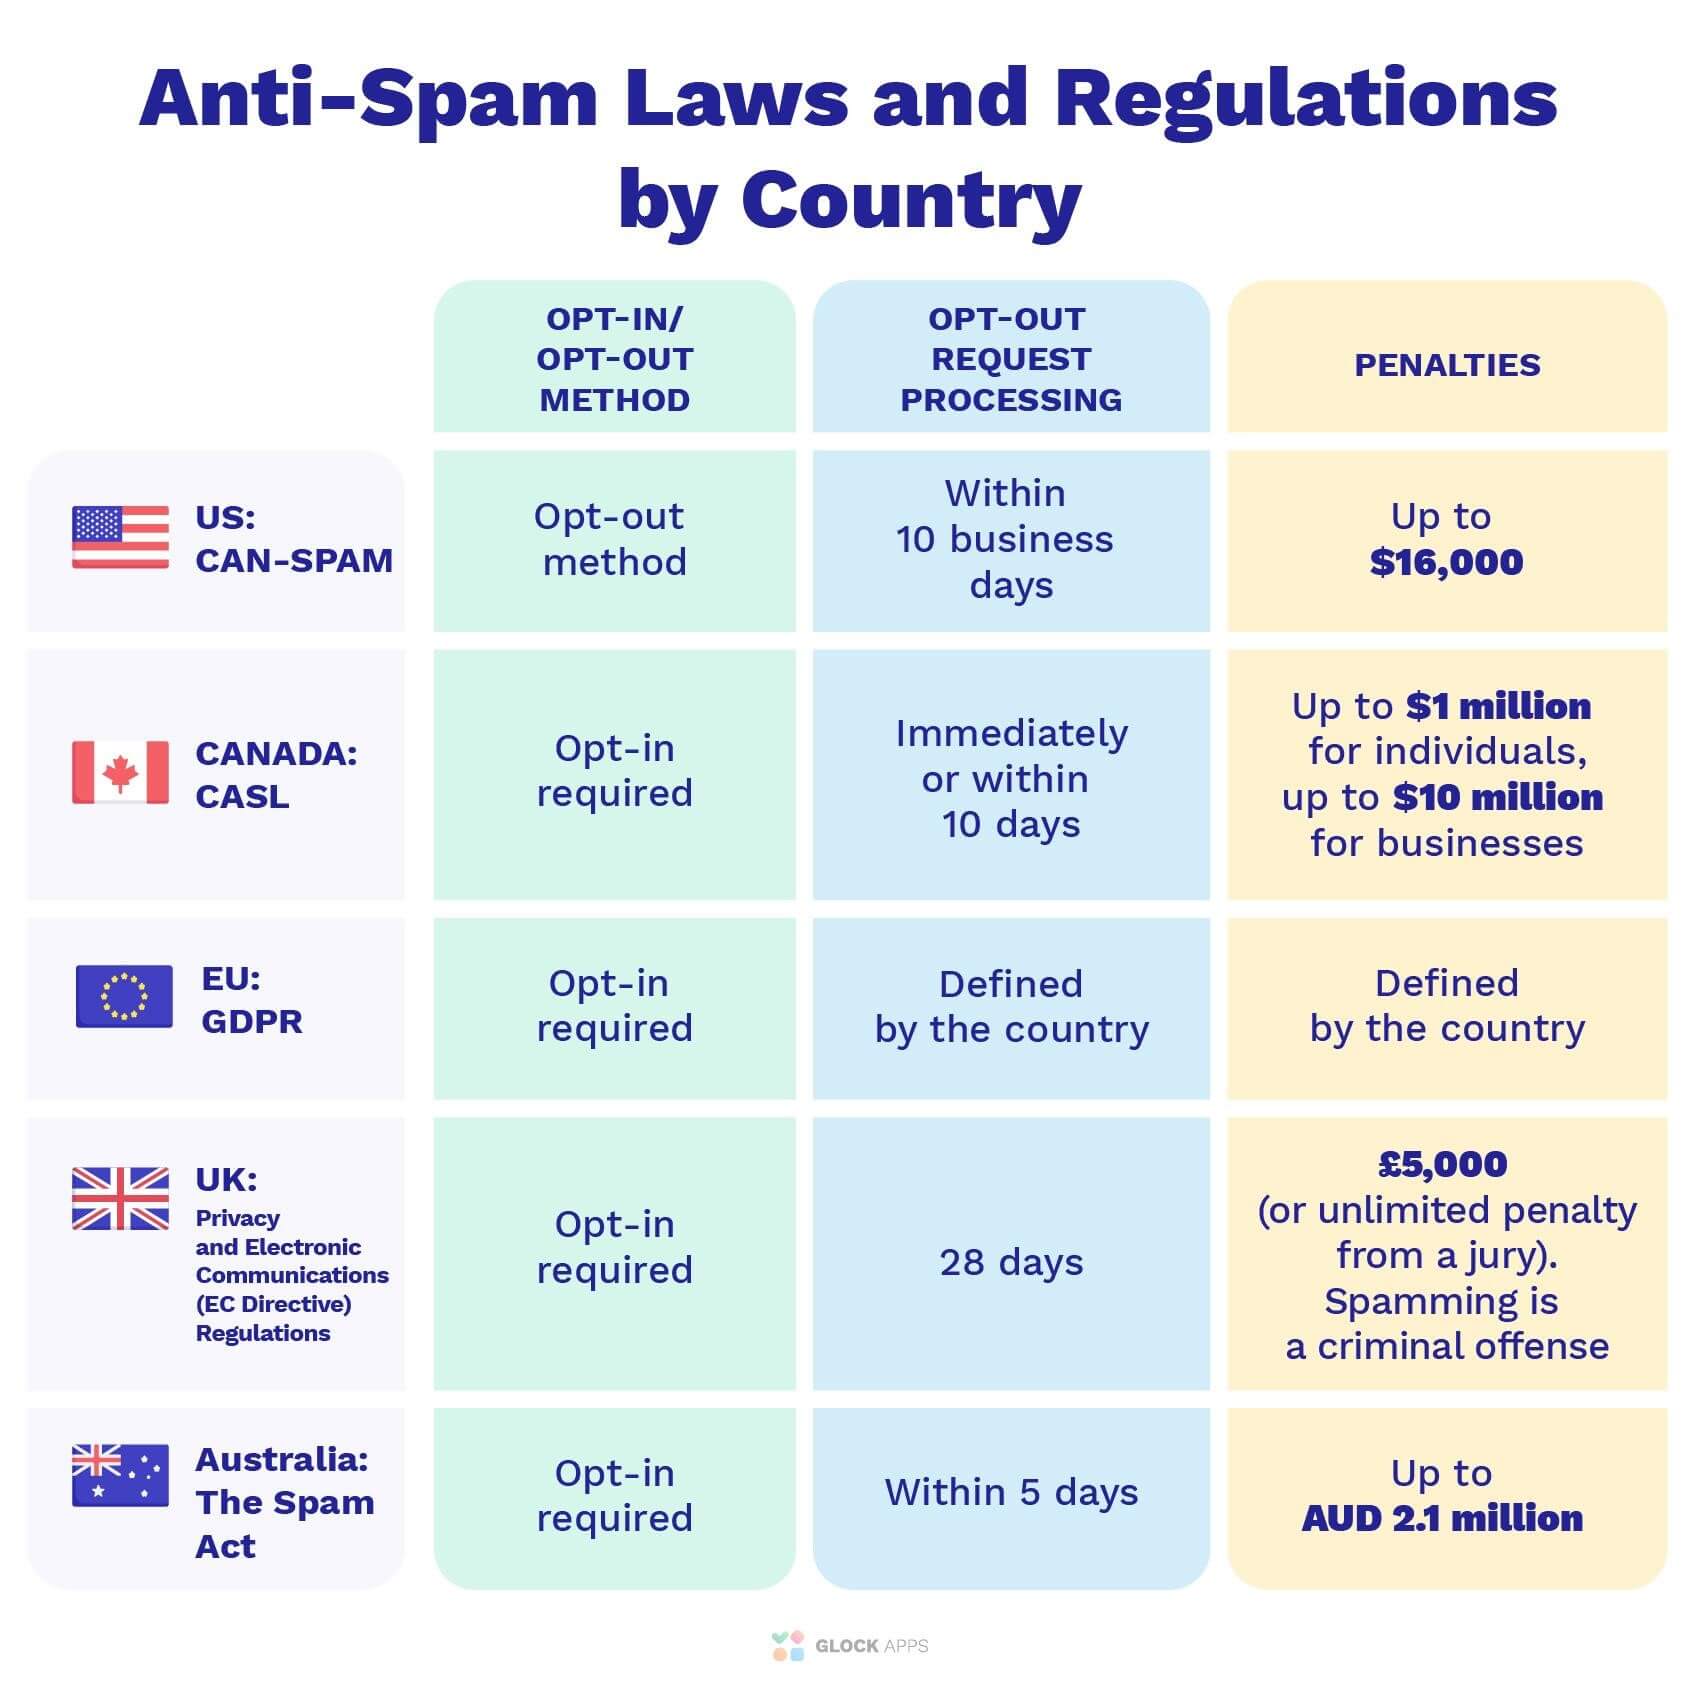 AntiSpam Regulations in 2020 Do You Comply? GlockApps